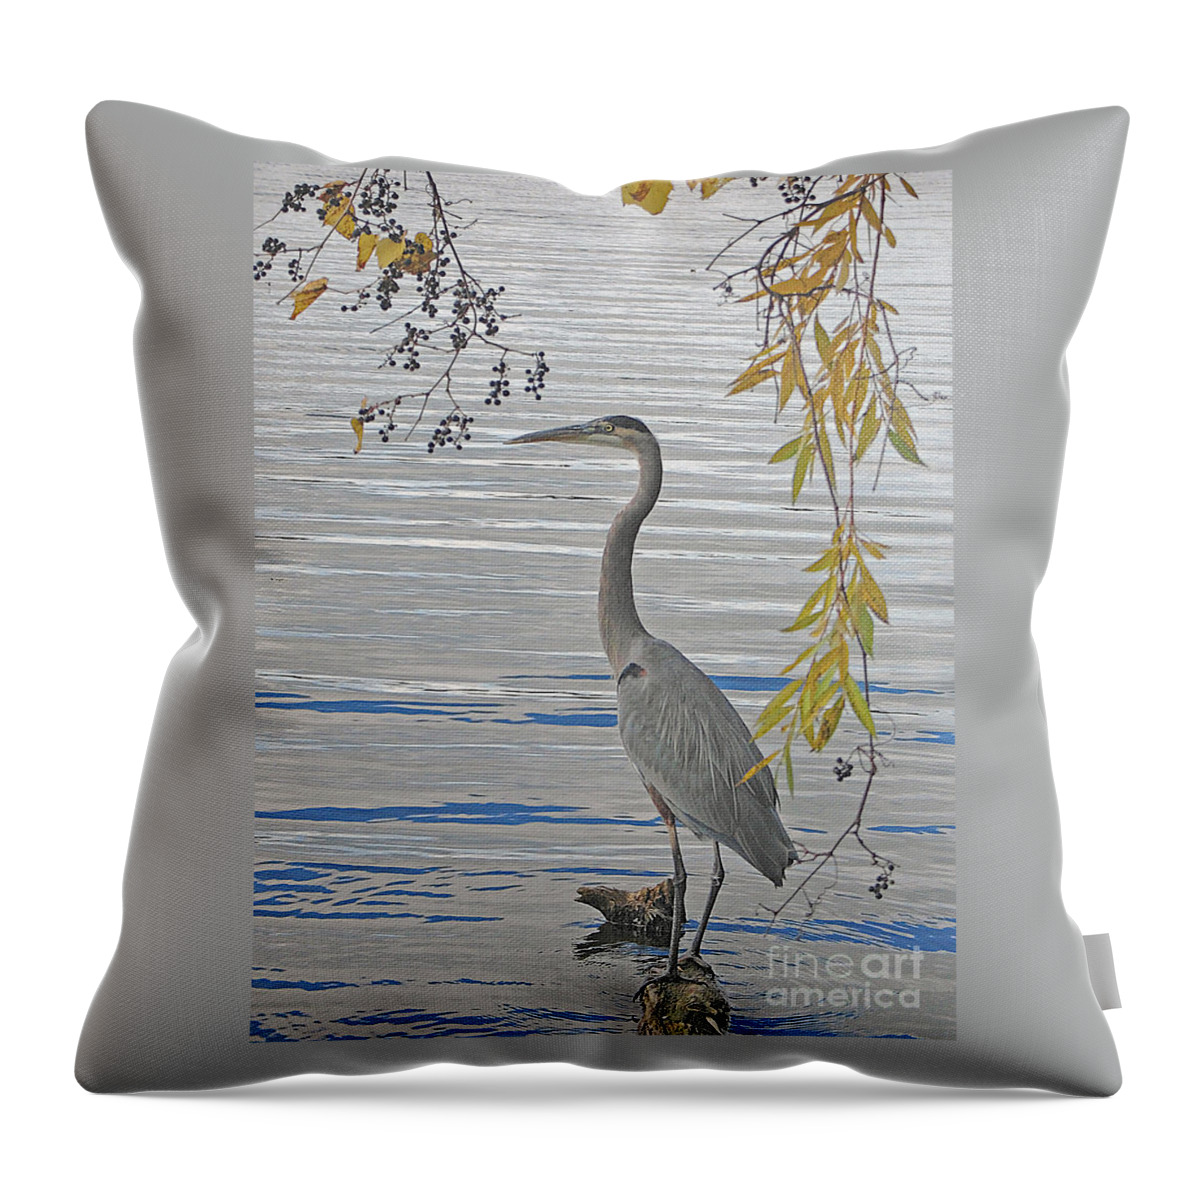 Heron Throw Pillow featuring the photograph Great Blue Heron by Ann Horn